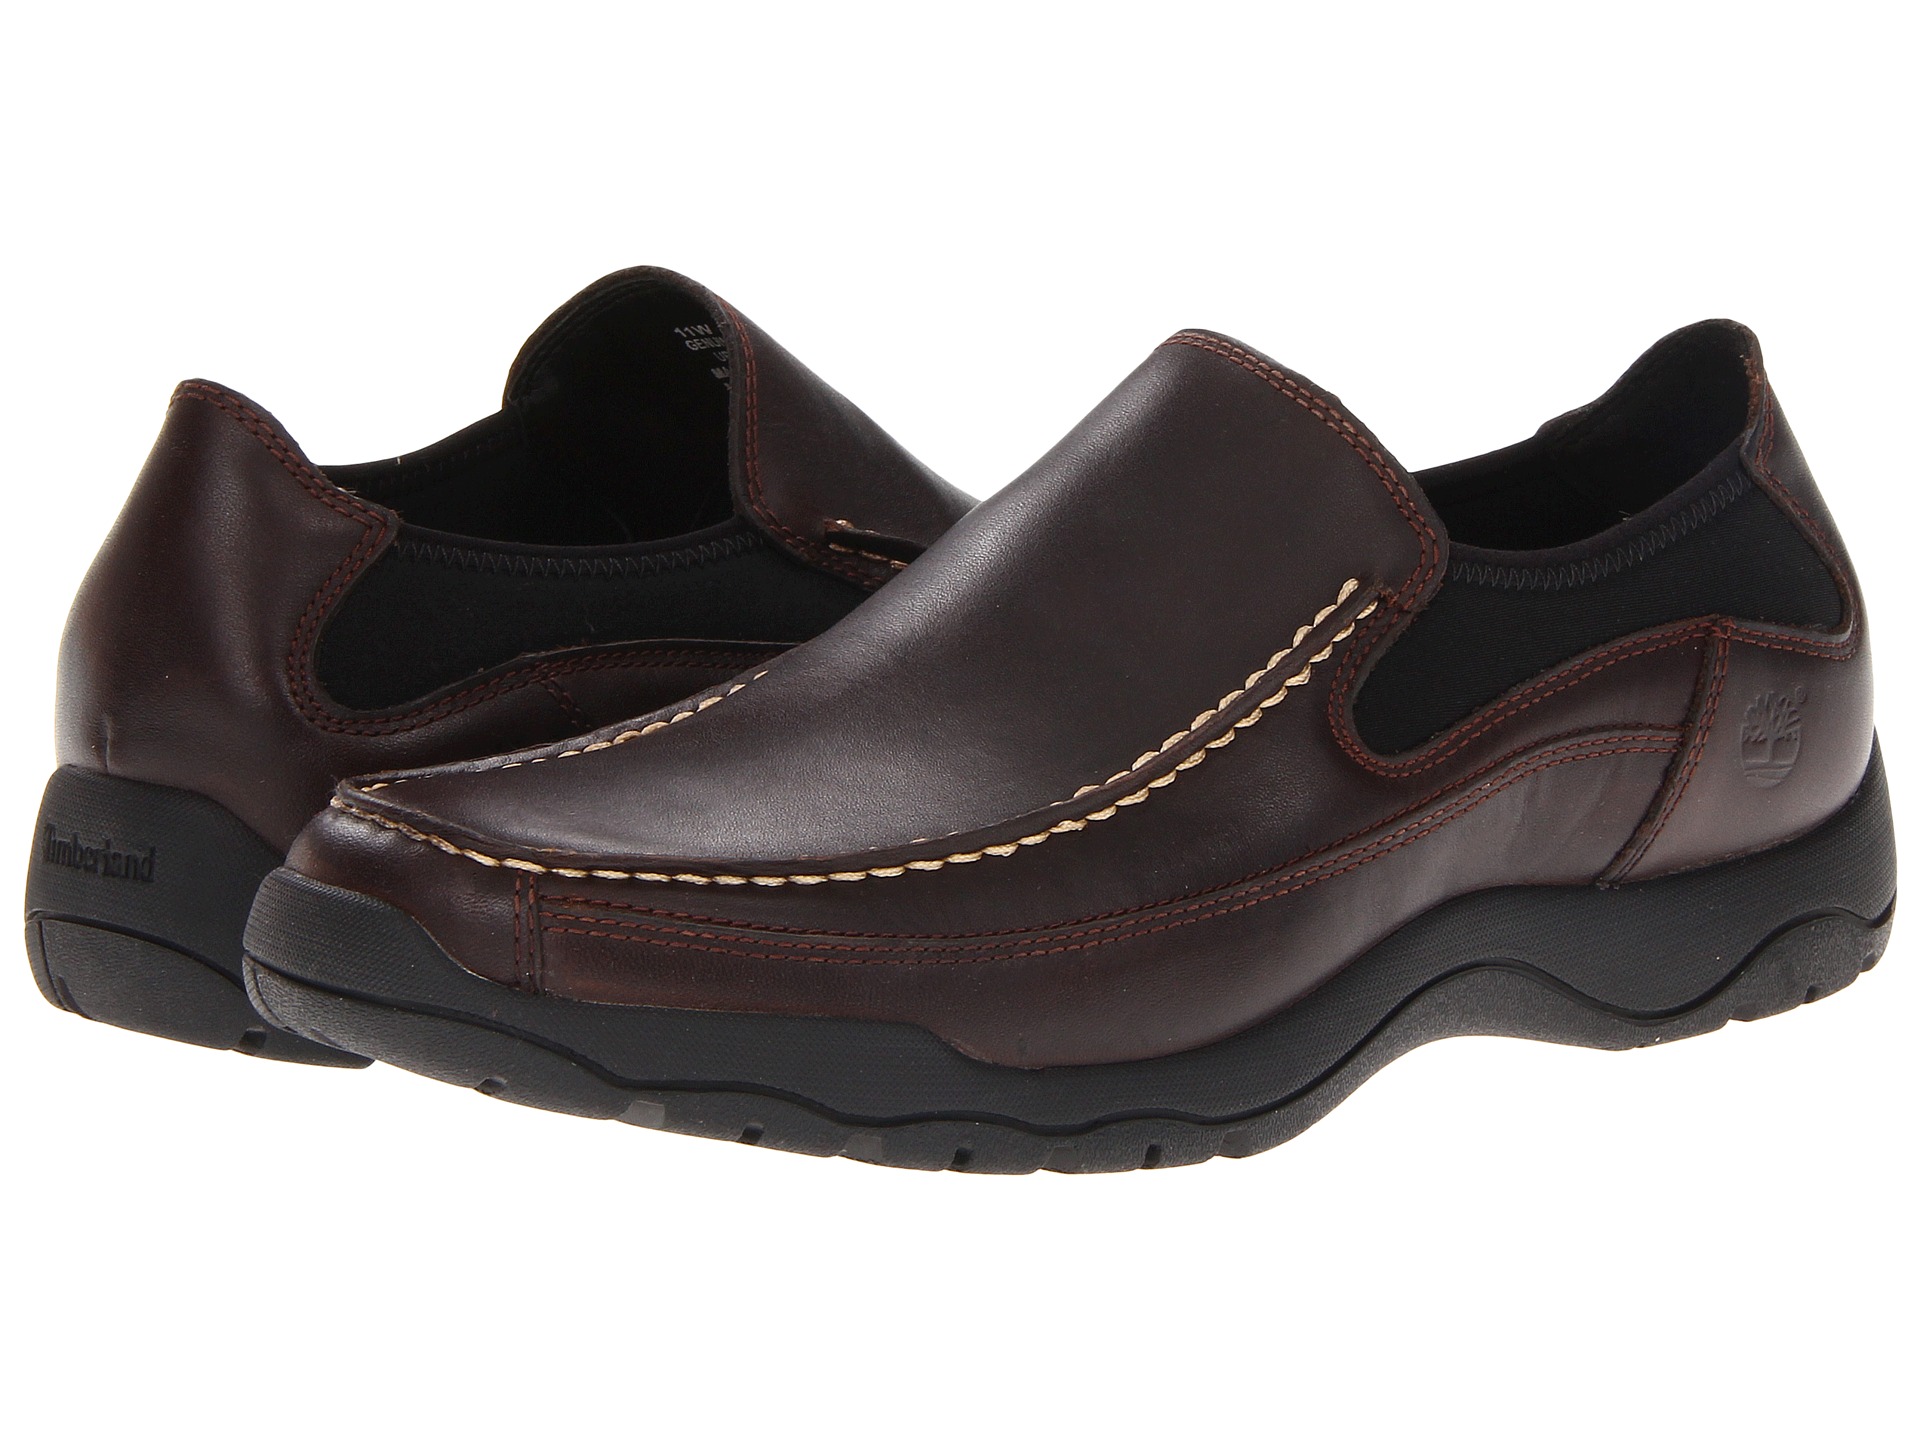 Timberland Earthkeepers Mount Kisco Slip On | Shipped Free at Zappos